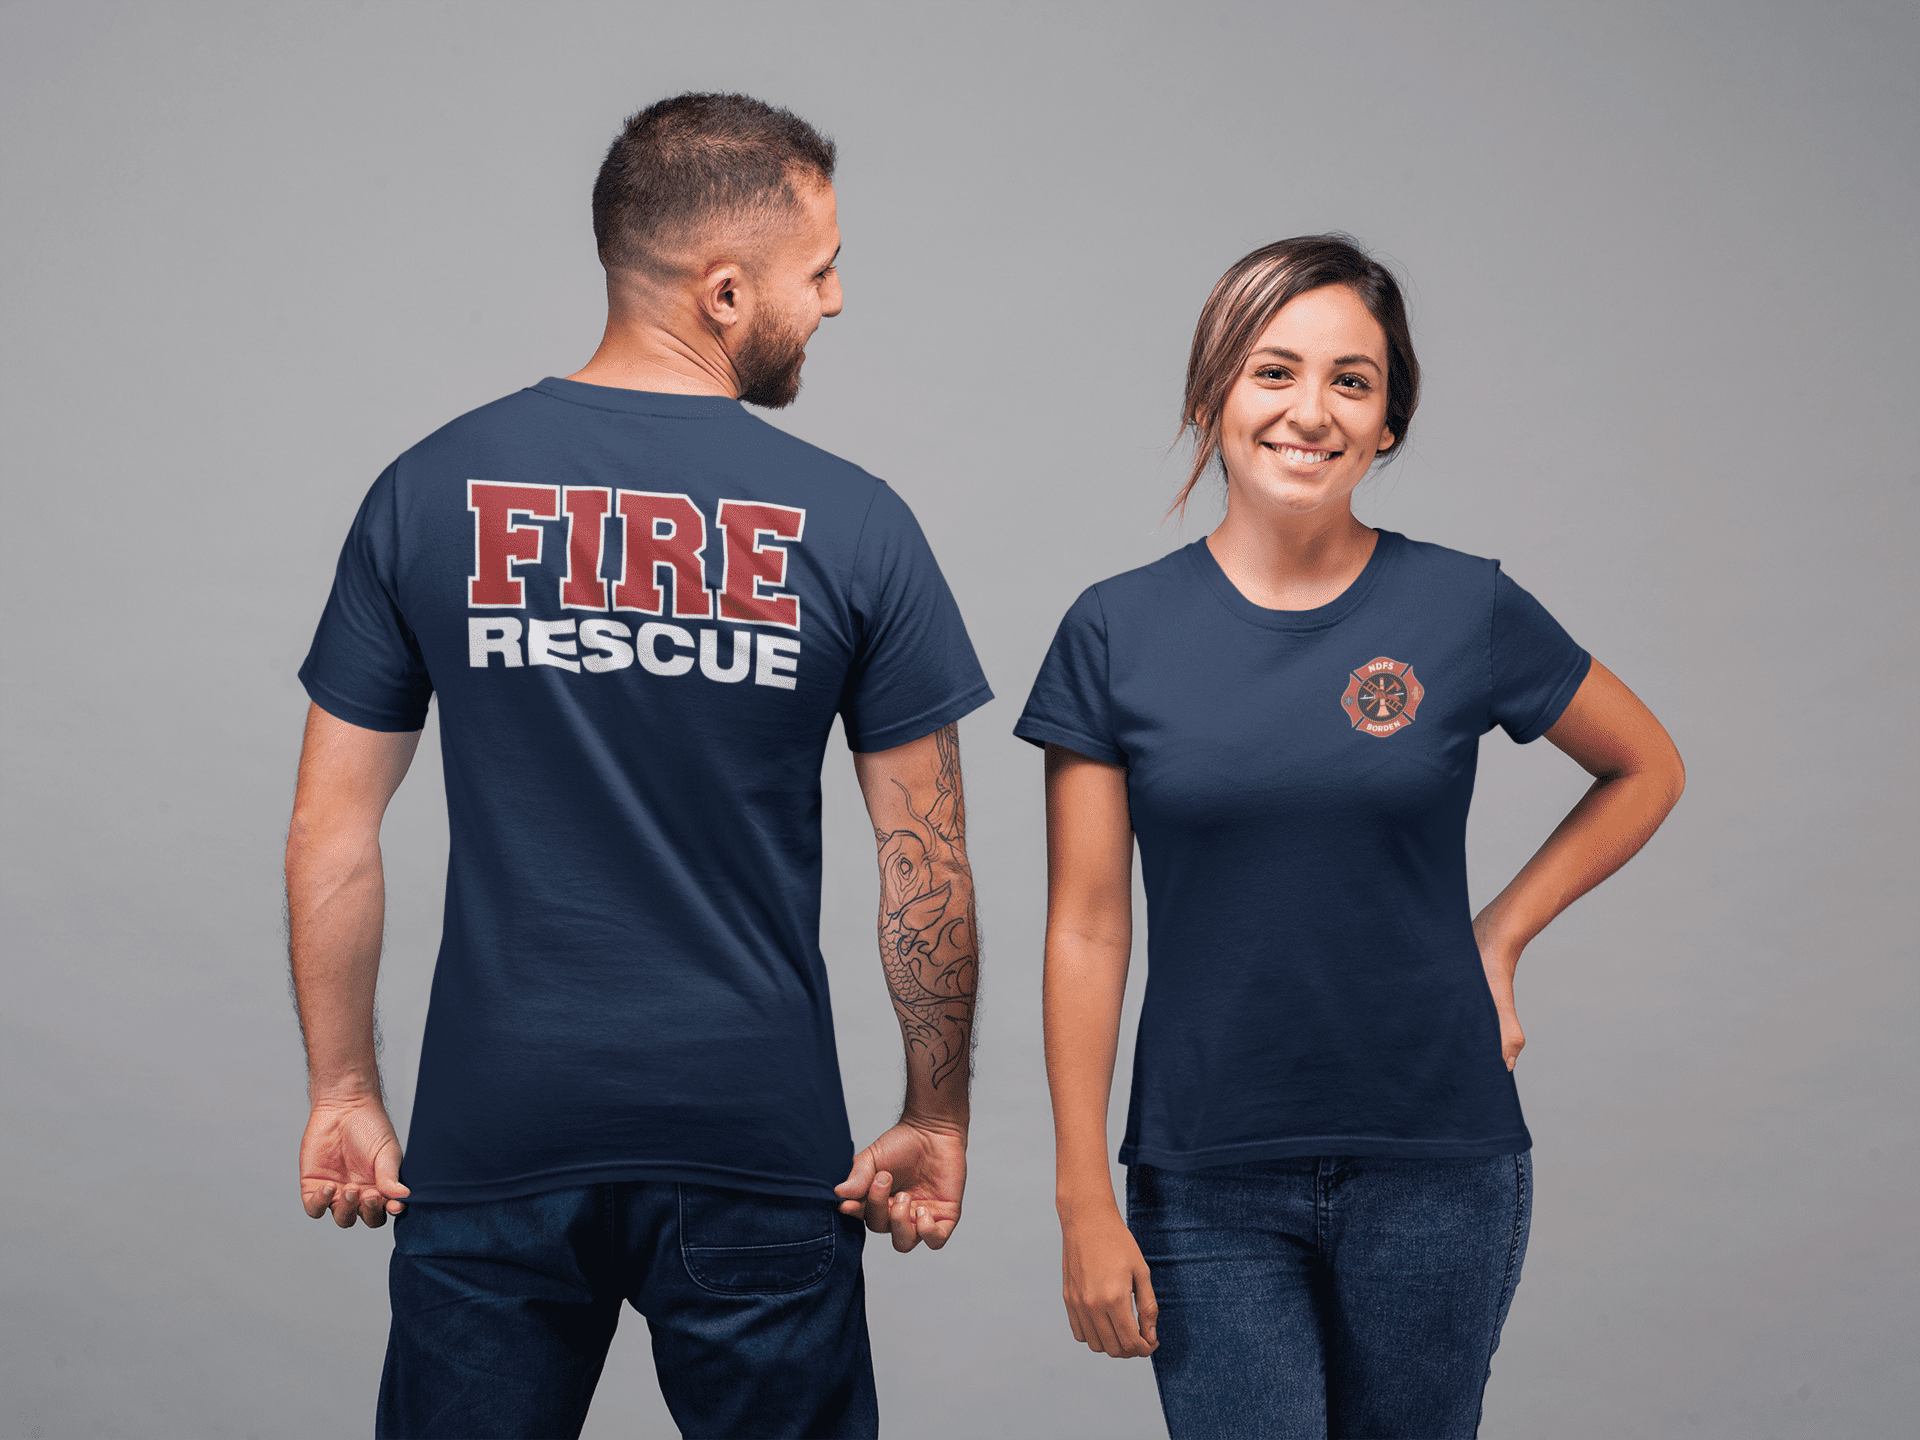 Firefighter Tshirts